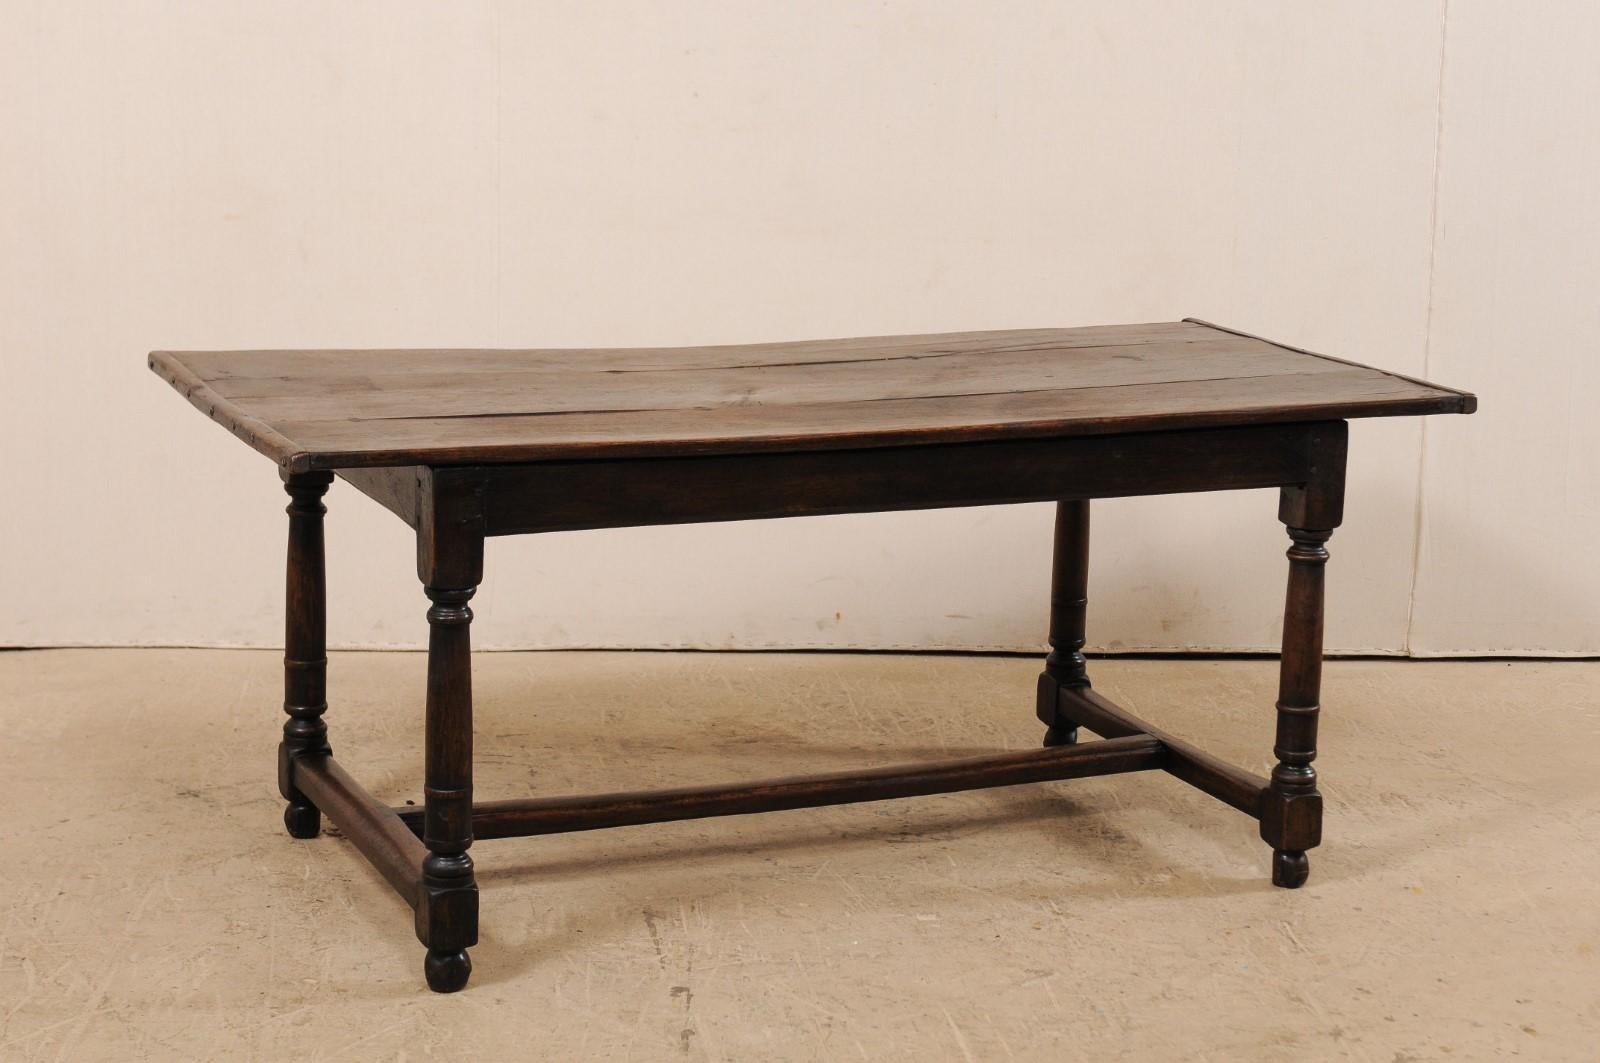 An early 19th century Italian dining table of walnut. This antique table from Italy has a rectangular-shaped top of lovely aged wood top, whose knots and grain add to the overall character of this piece, atop a plain skirt, and raised upon four